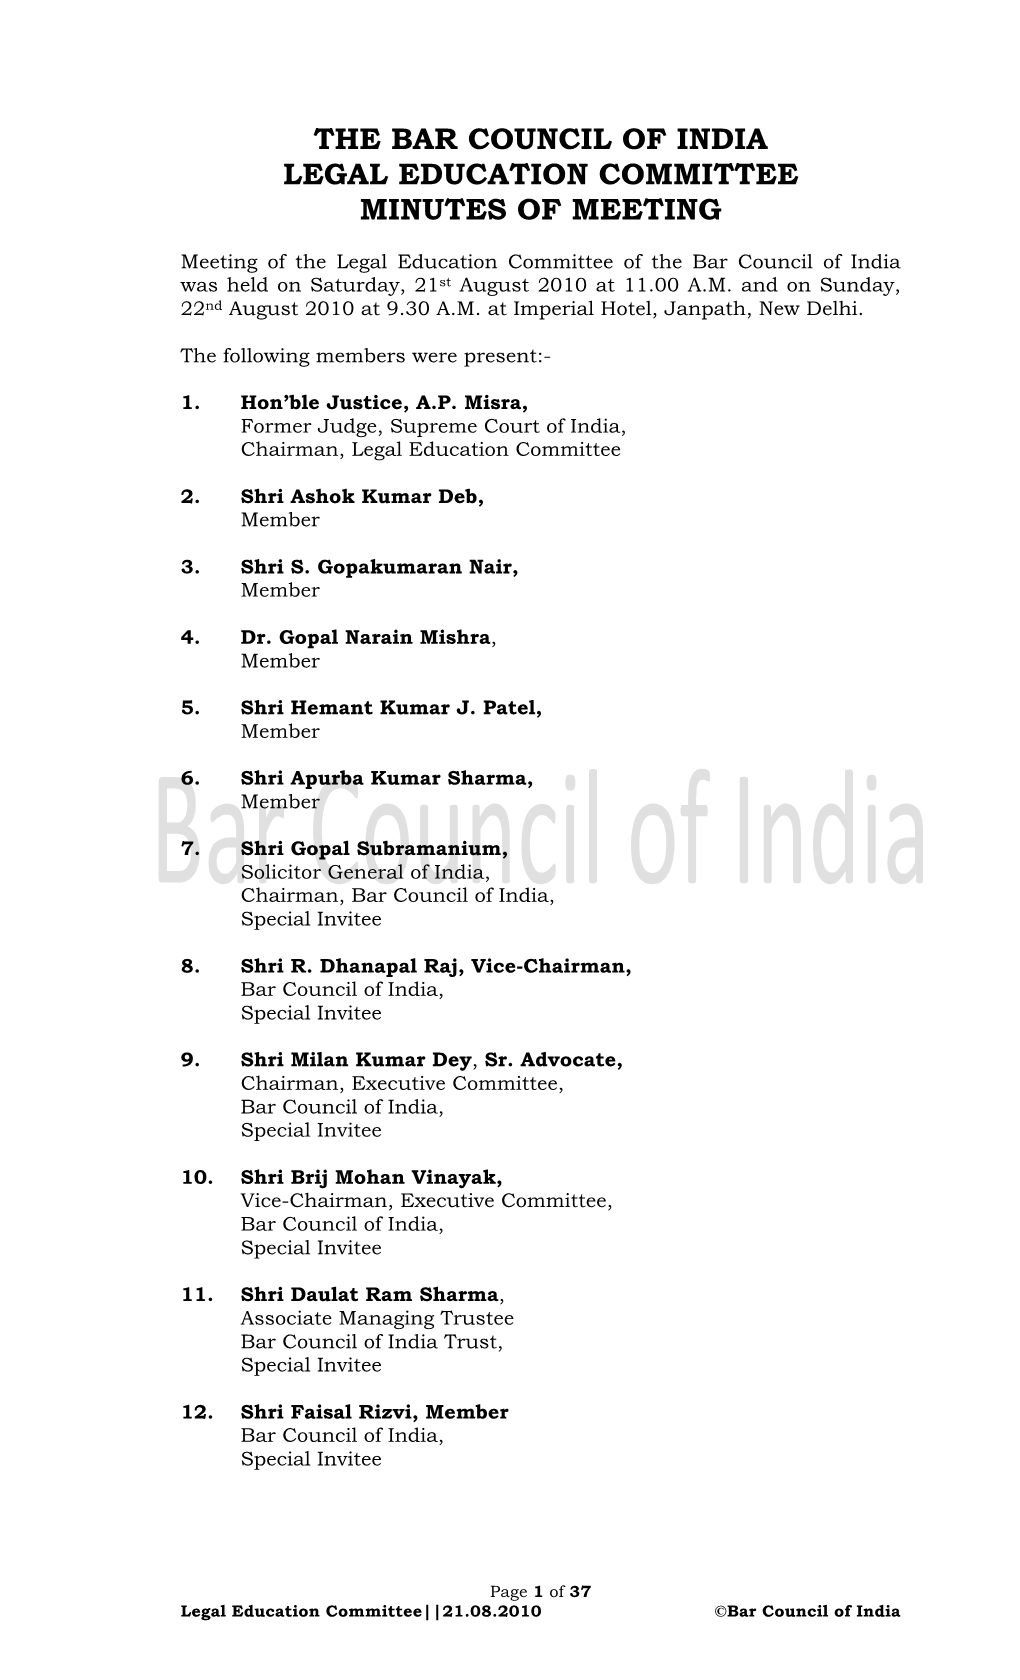 The Bar Council of India Legal Education Committee Minutes of Meeting